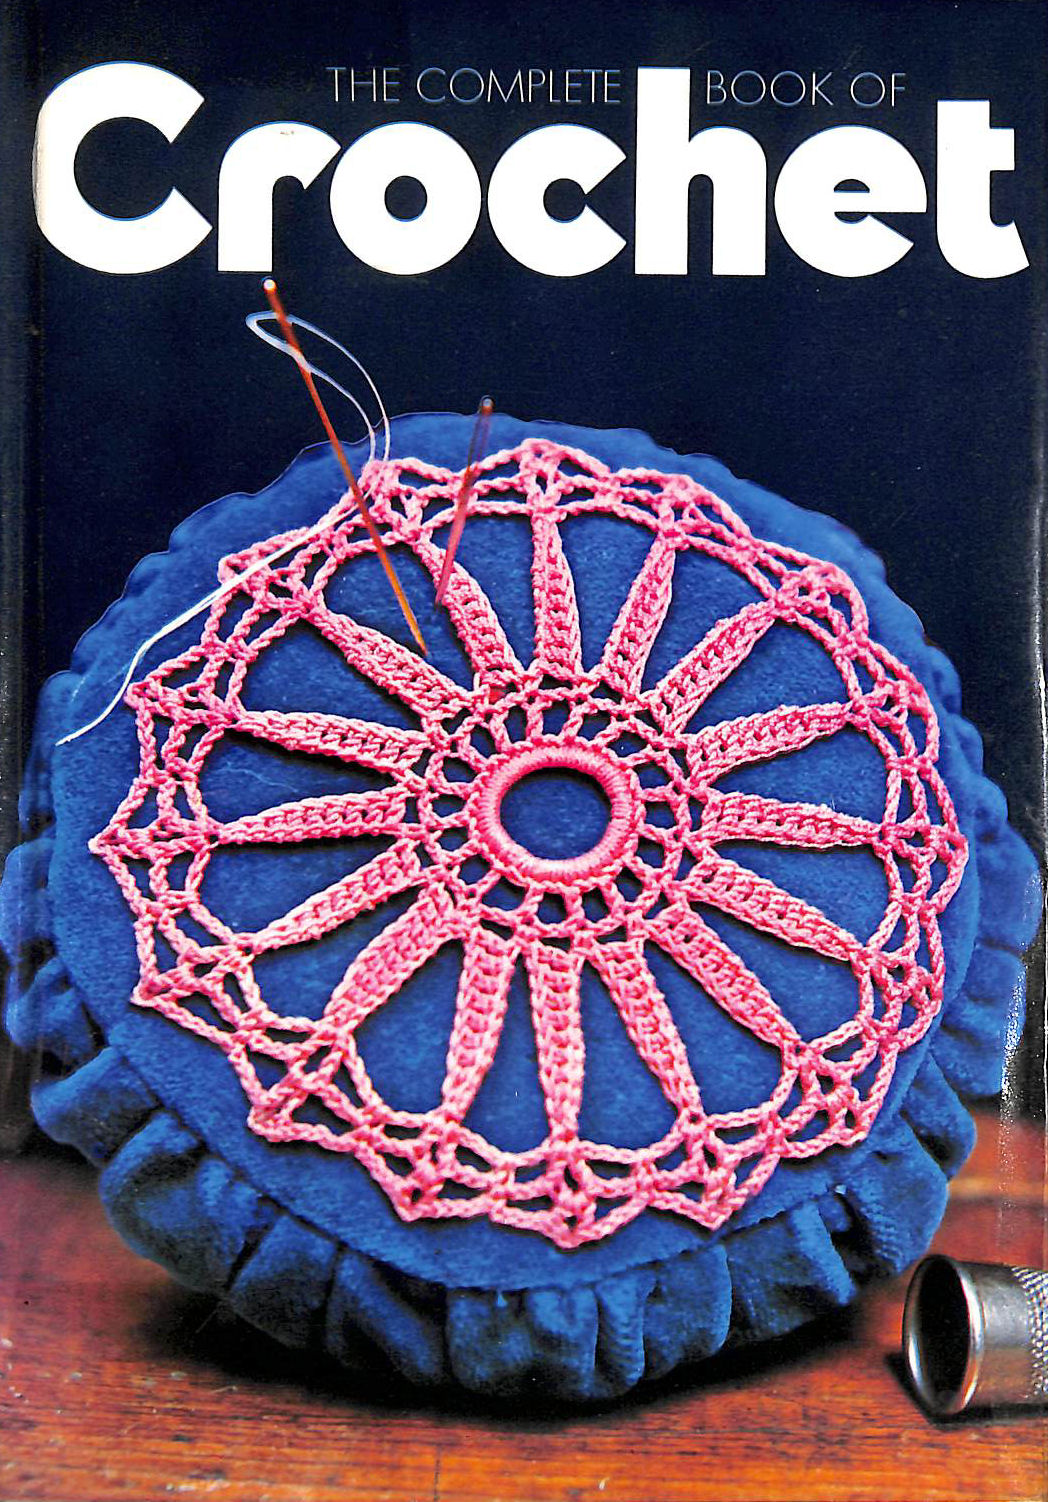 ANONYMOUS - Complete Book of Crochet, The